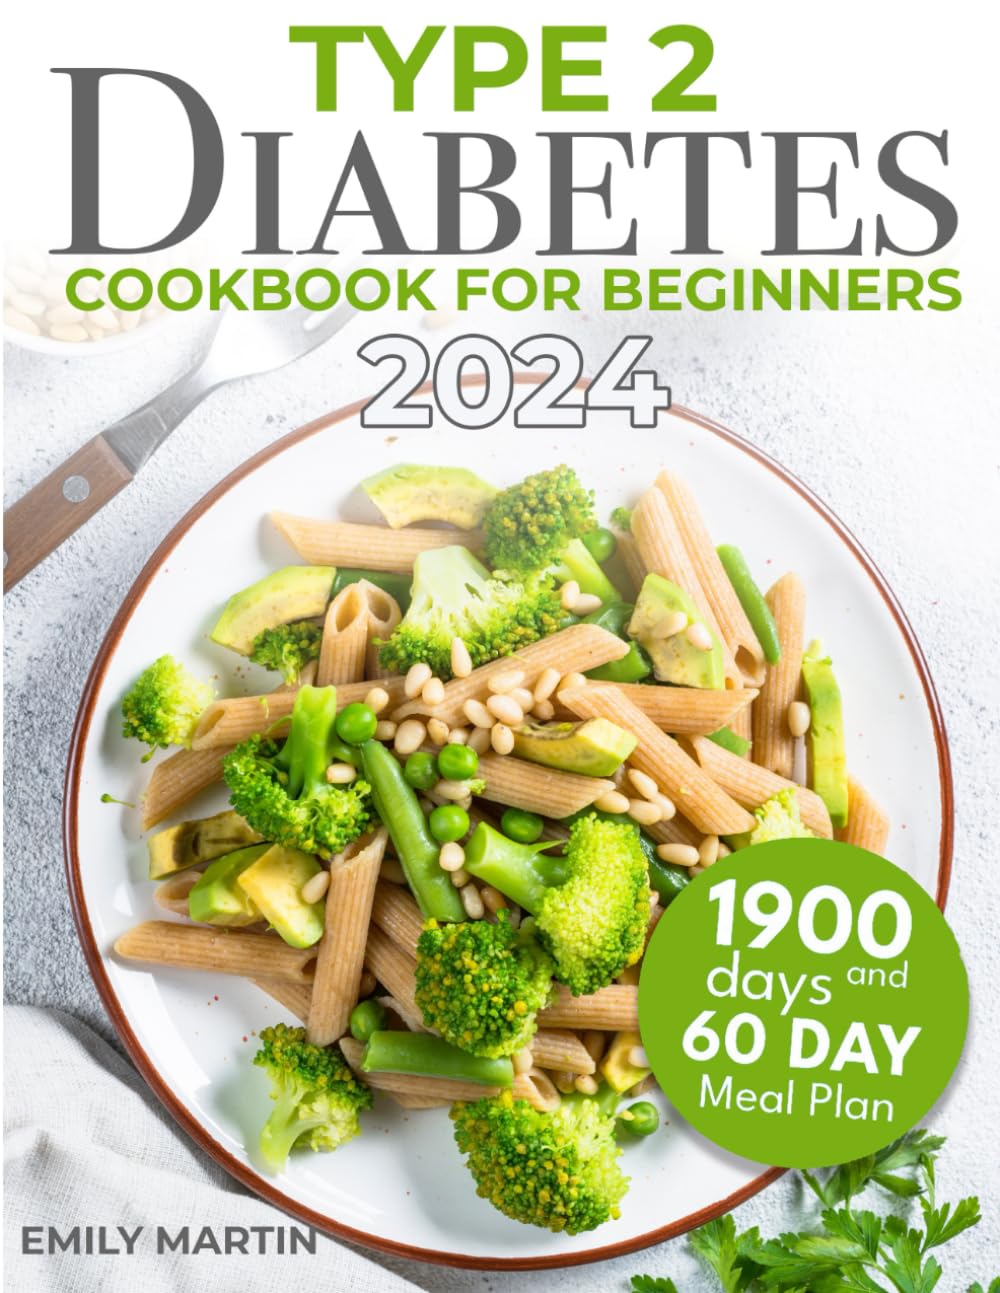 Type 2 Diabetes Cookbook for Beginners: Taste and Health United; Transform Your Diet with Easy, Flavorful Recipes for Type 2 Diabetes. Comes with an Innovative 60-Day Meal